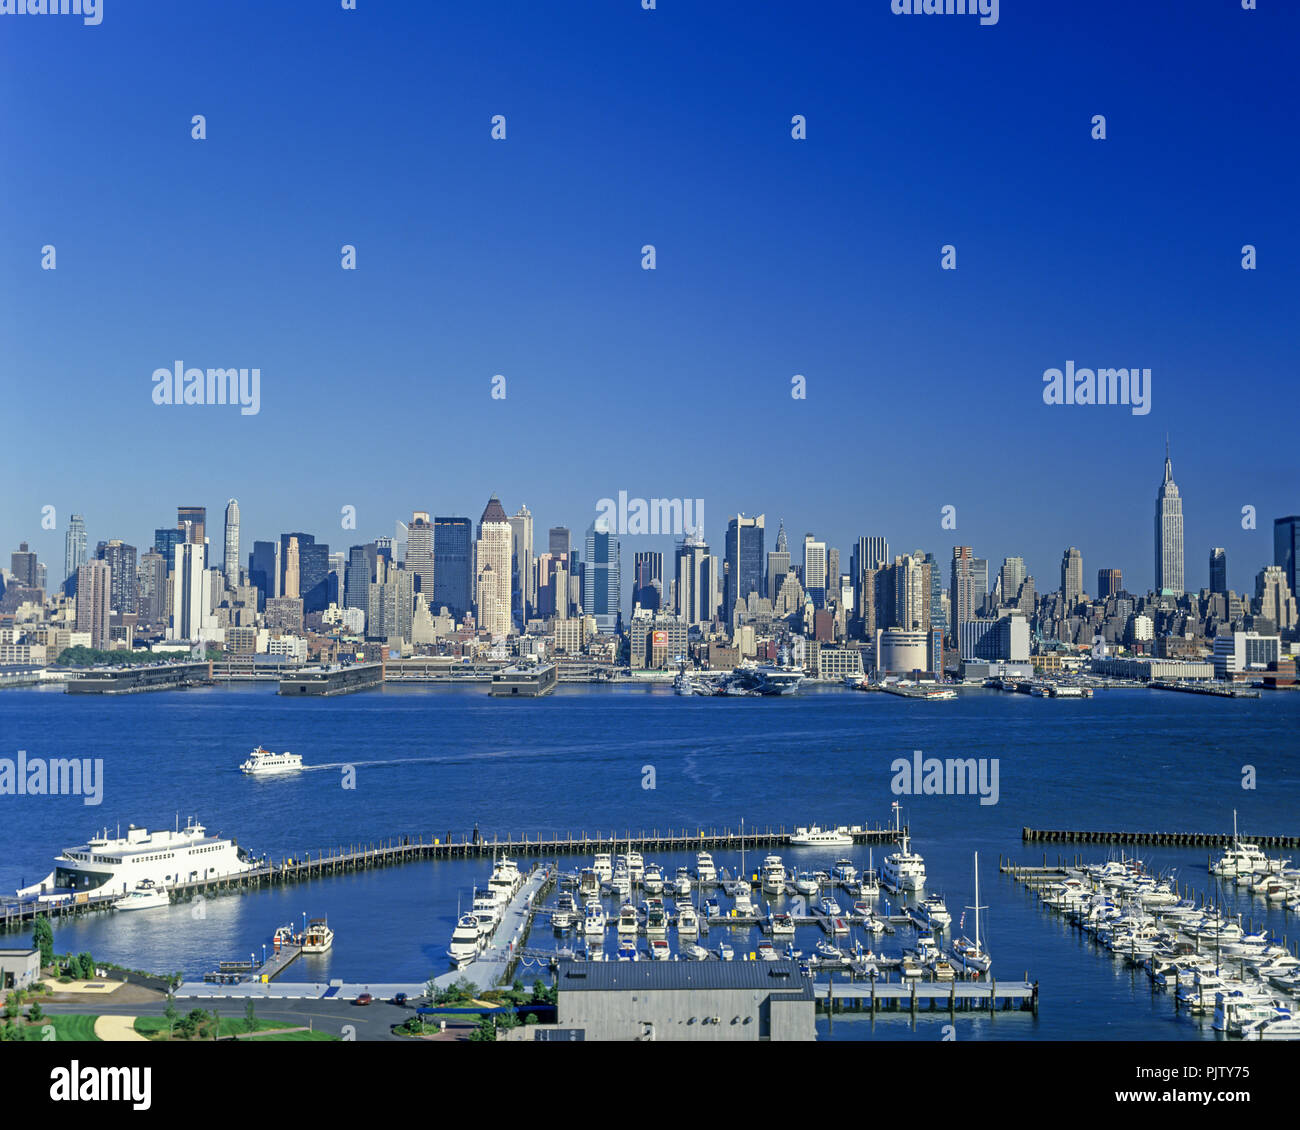 1990 HISTORICAL MIDTOWN MANHATTAN SKYLINE HUDSON RIVER NEW YORK CITY FROM PORT IMPERIAL NEW JERSEY USA Stock Photo